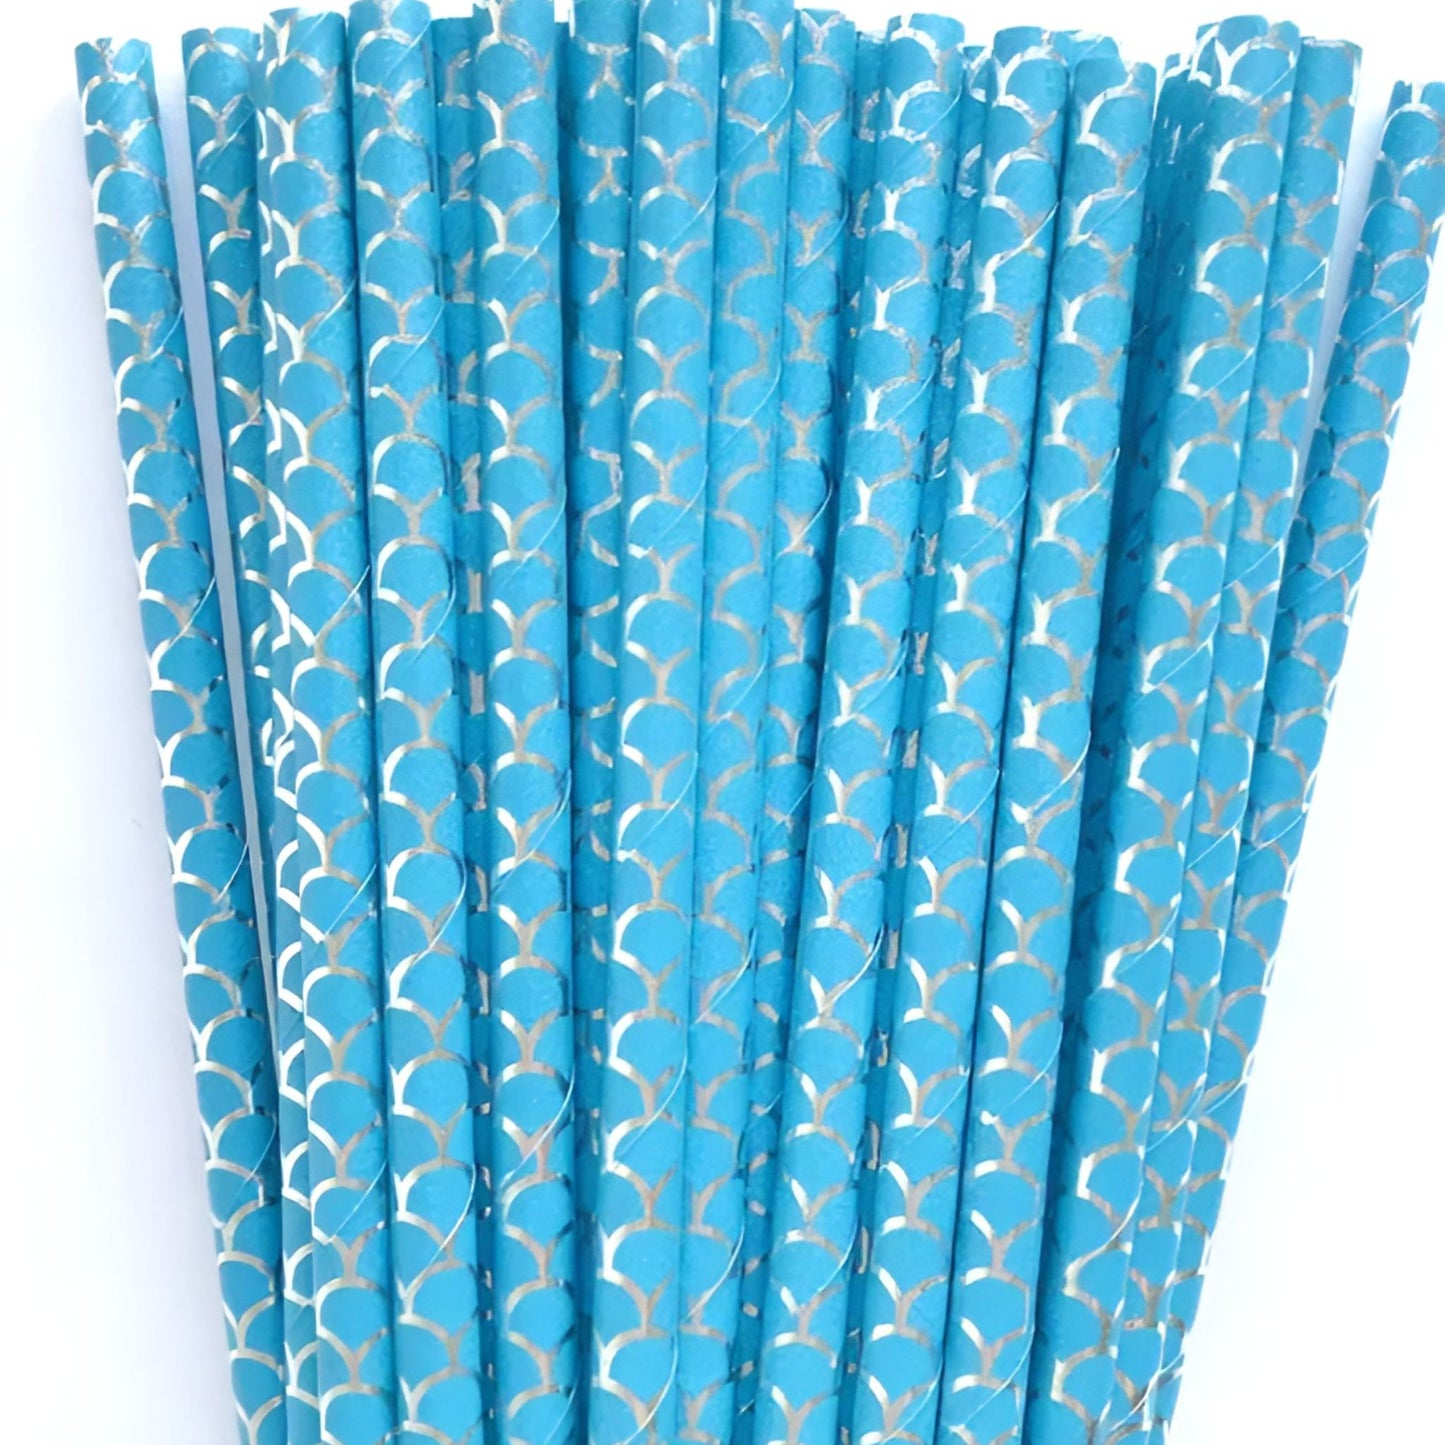 Mermaid pattern paper straws in blue and silver. 25 pack